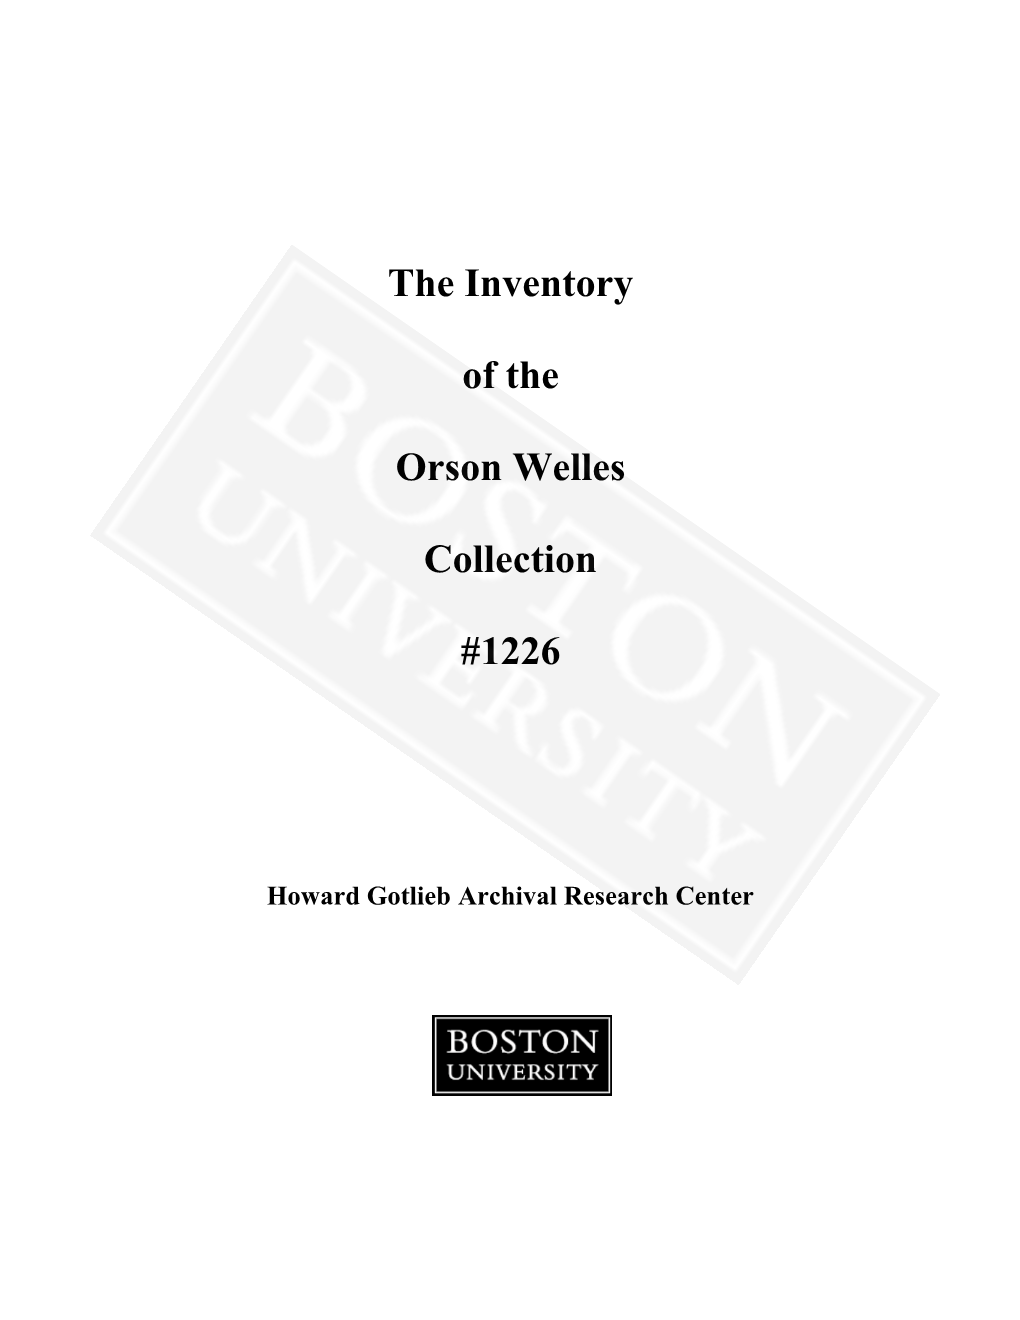 The Inventory of the Orson Welles Collection #1226